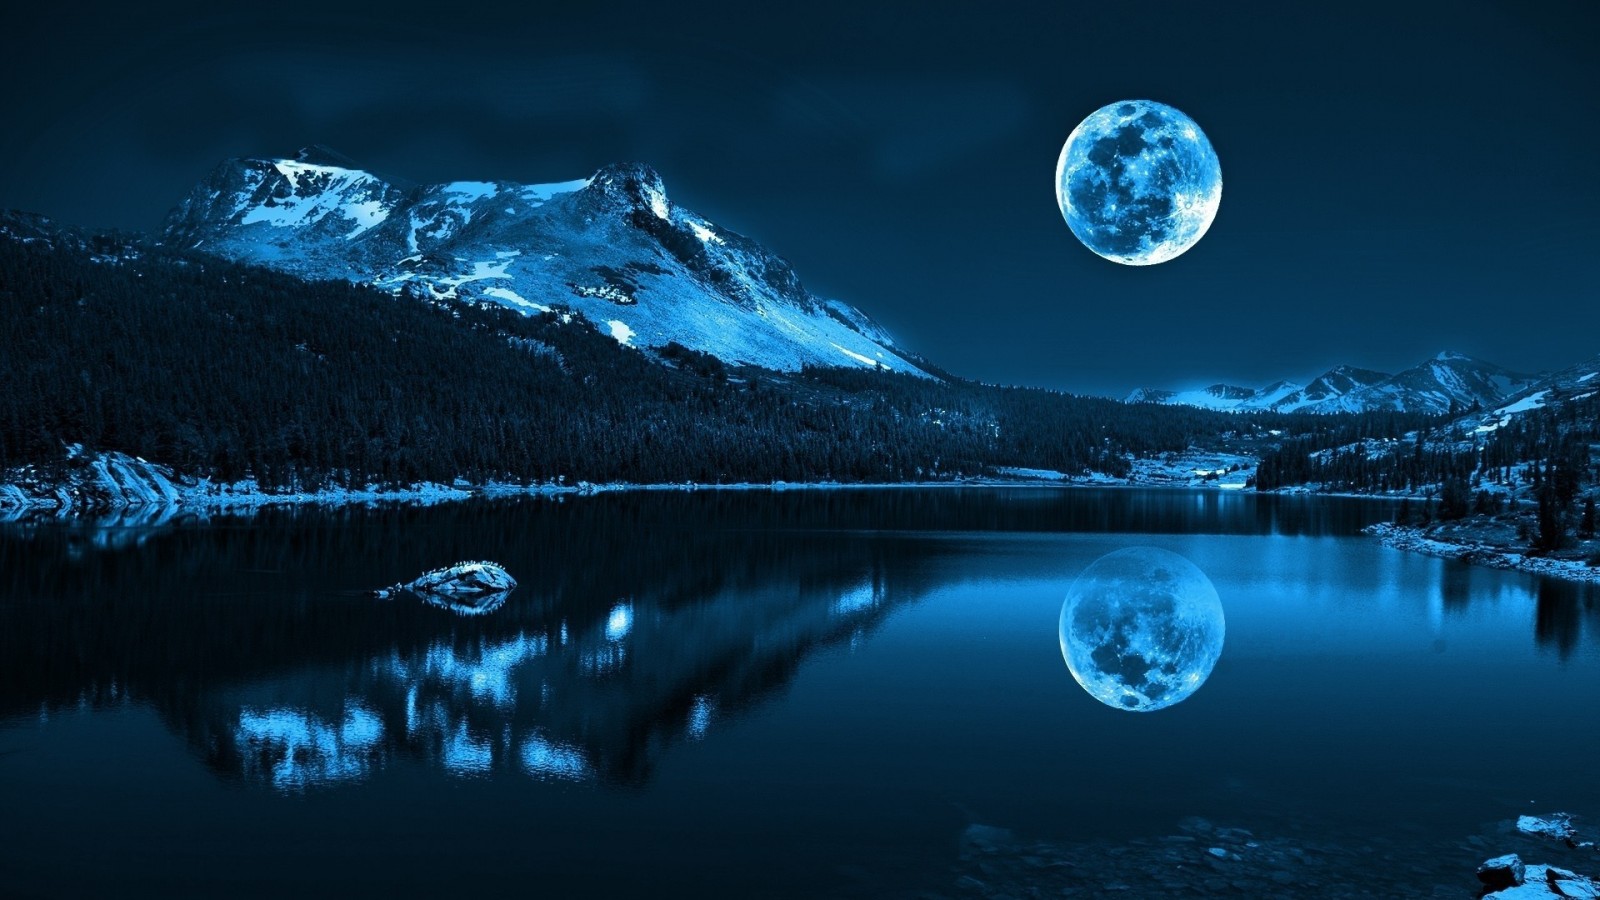 sunlight, trees, landscape, forest, mountains, digital art, night, lake, water, nature, reflection, sky, winter, Earth, Moon, blue, cold, moonlight, atmosphere, pond, light, darkness, computer wallpaper, astronomical object, full moon High quality